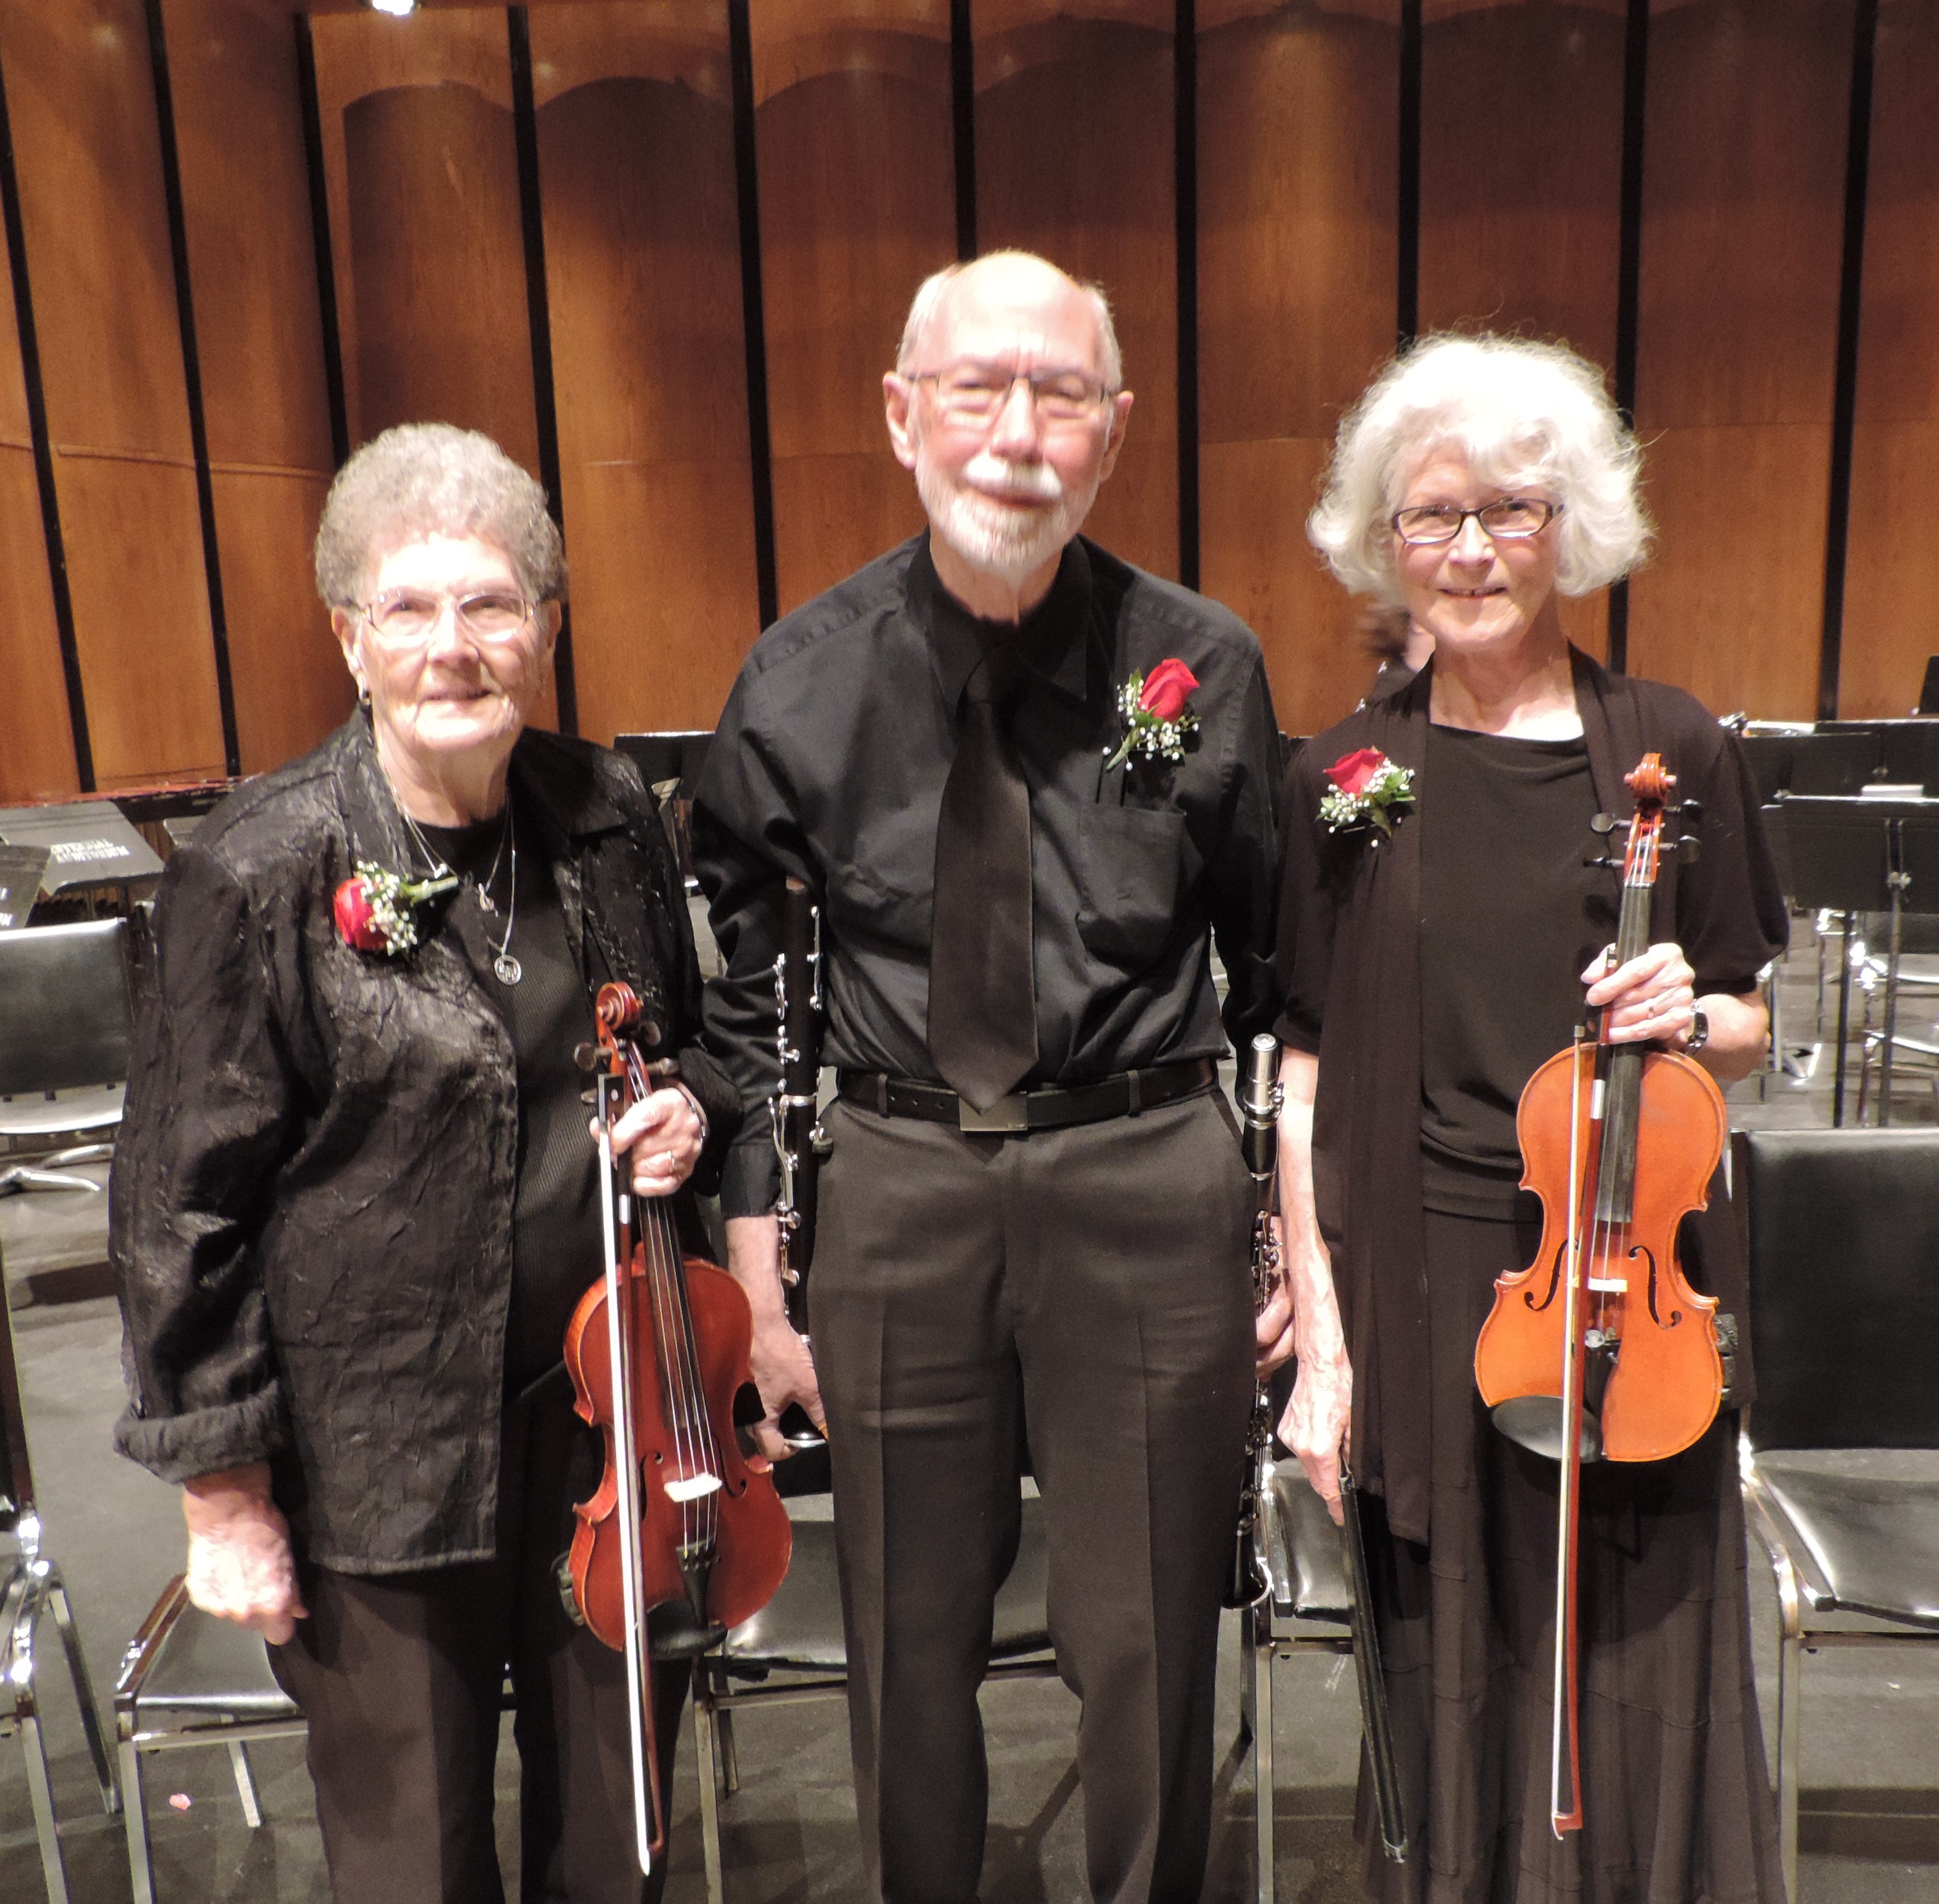 Three musicians pose together, dressed in black wearing corsages. They are Erma Wyness and Gwyn Pickering holding violins, and Mel Roberts holding a clarinet. 